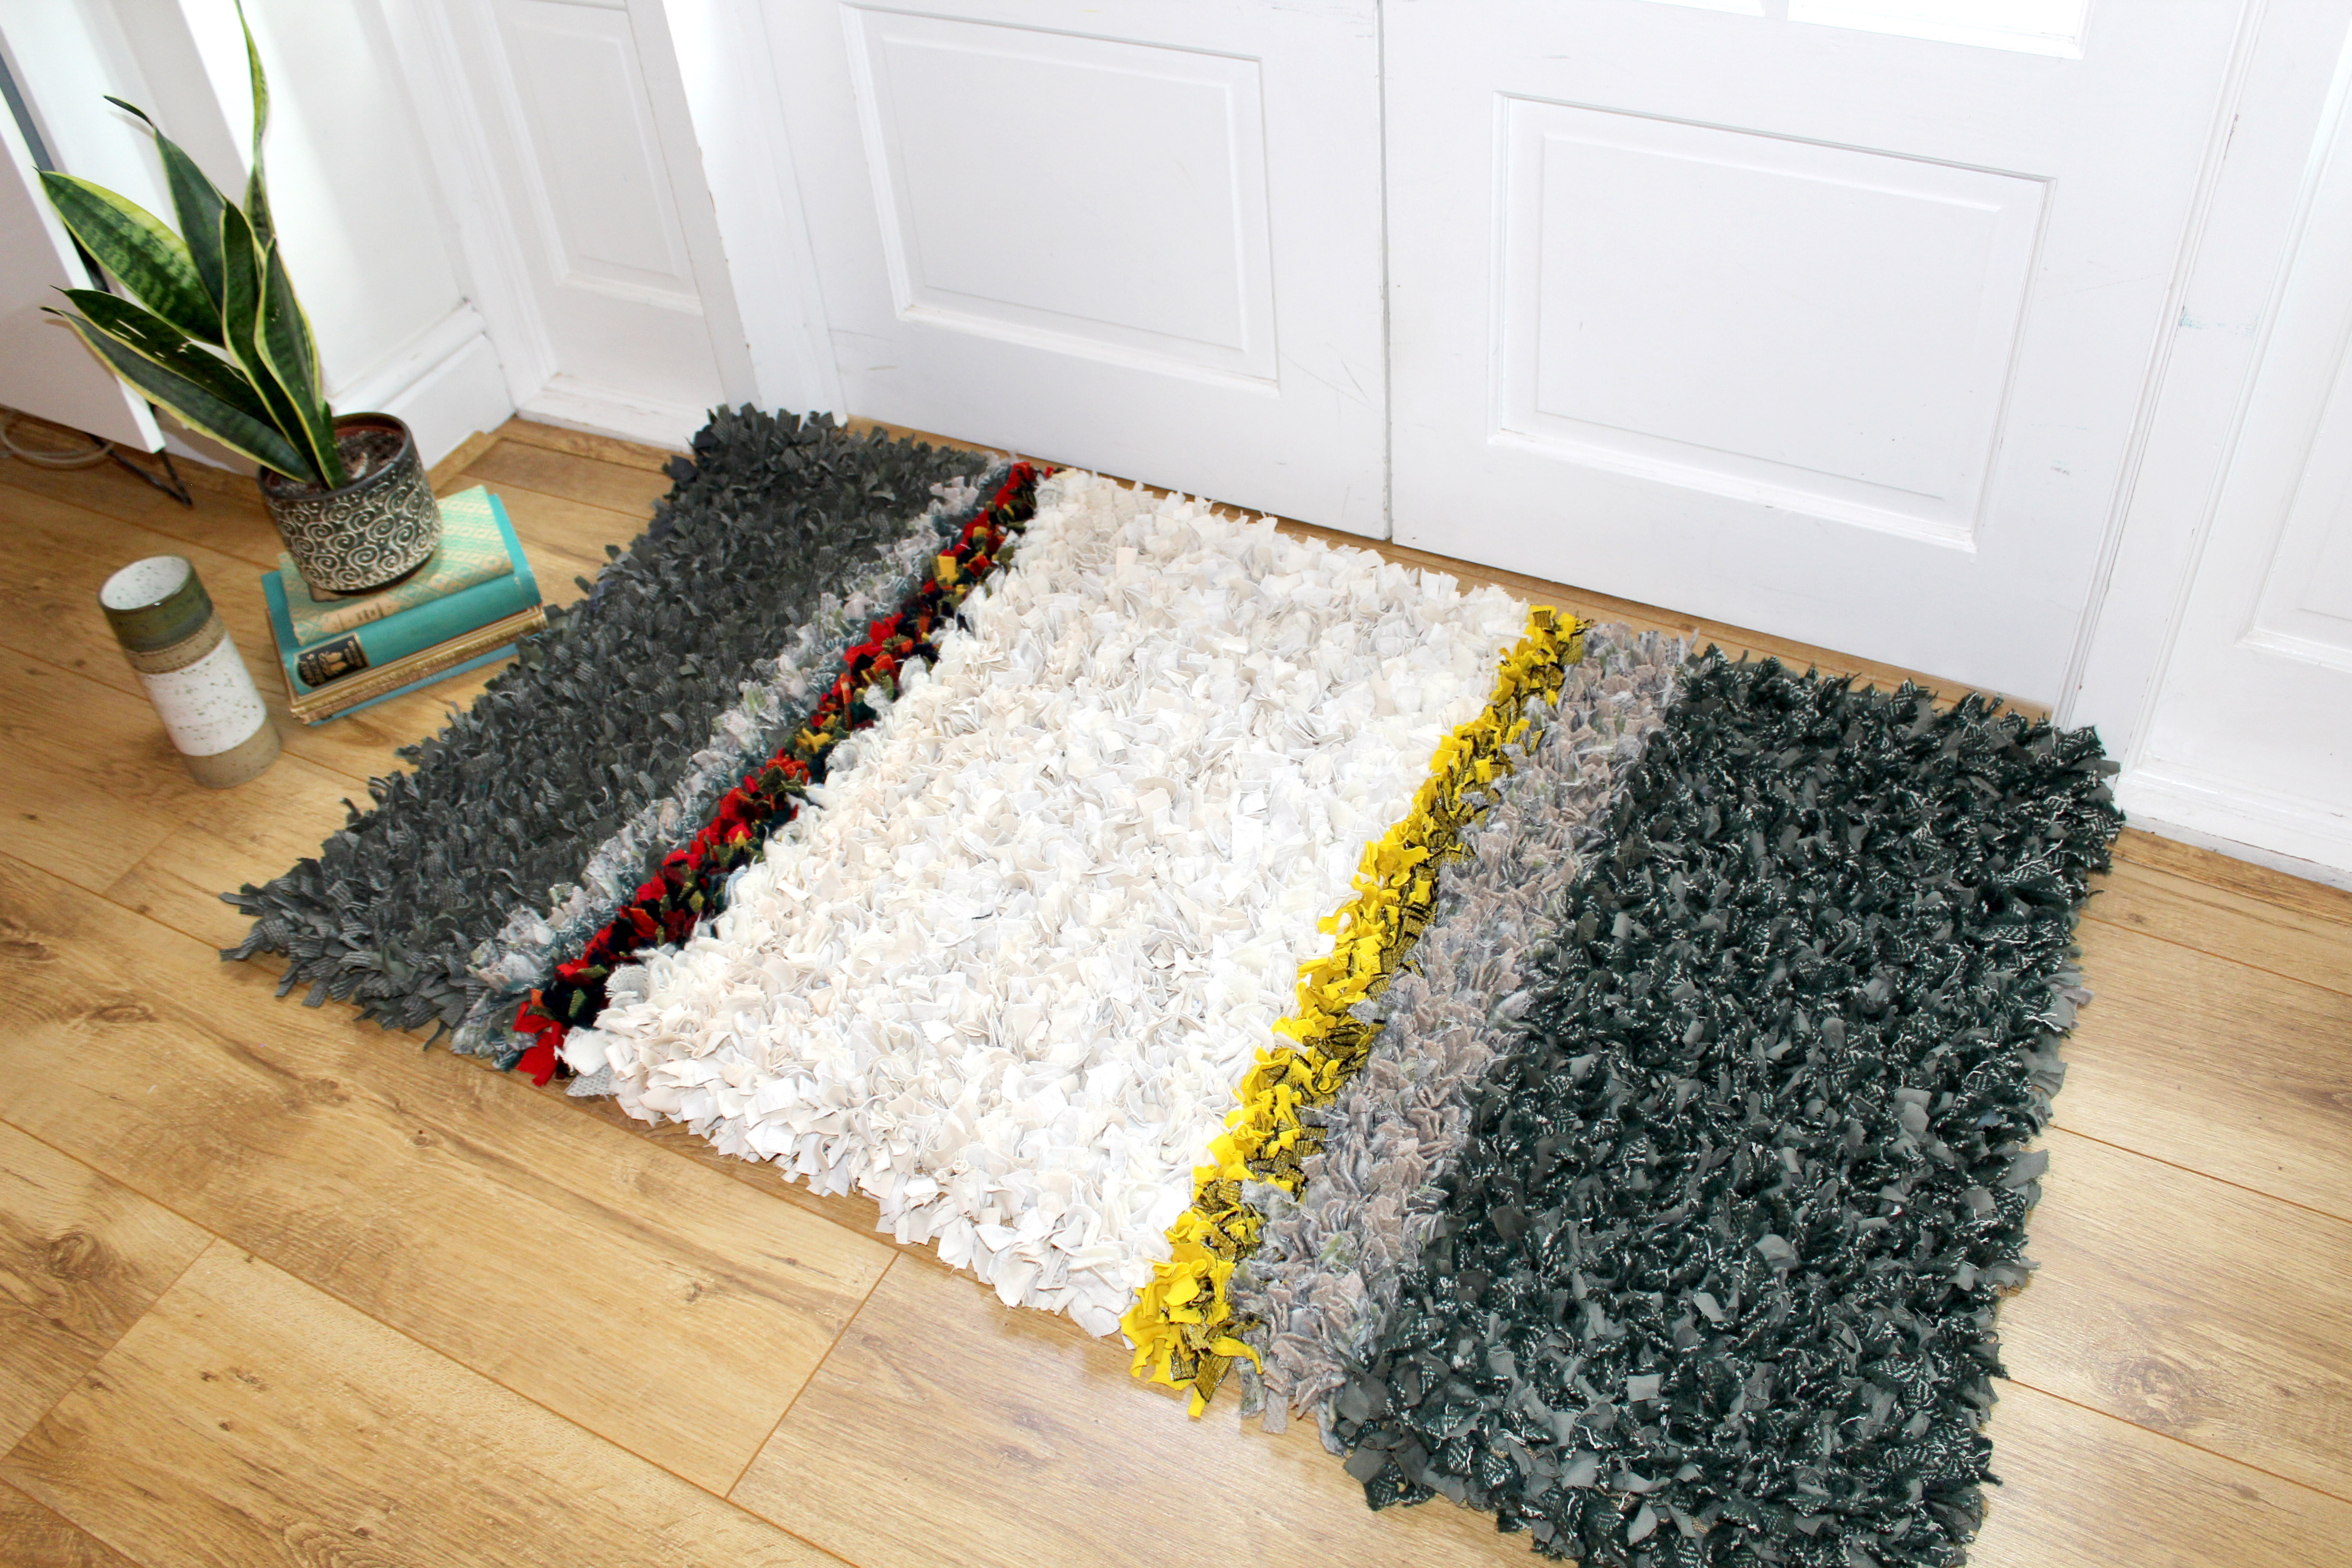 Ragged Life Rag rug on floor made using textile waste and clothing offcuts